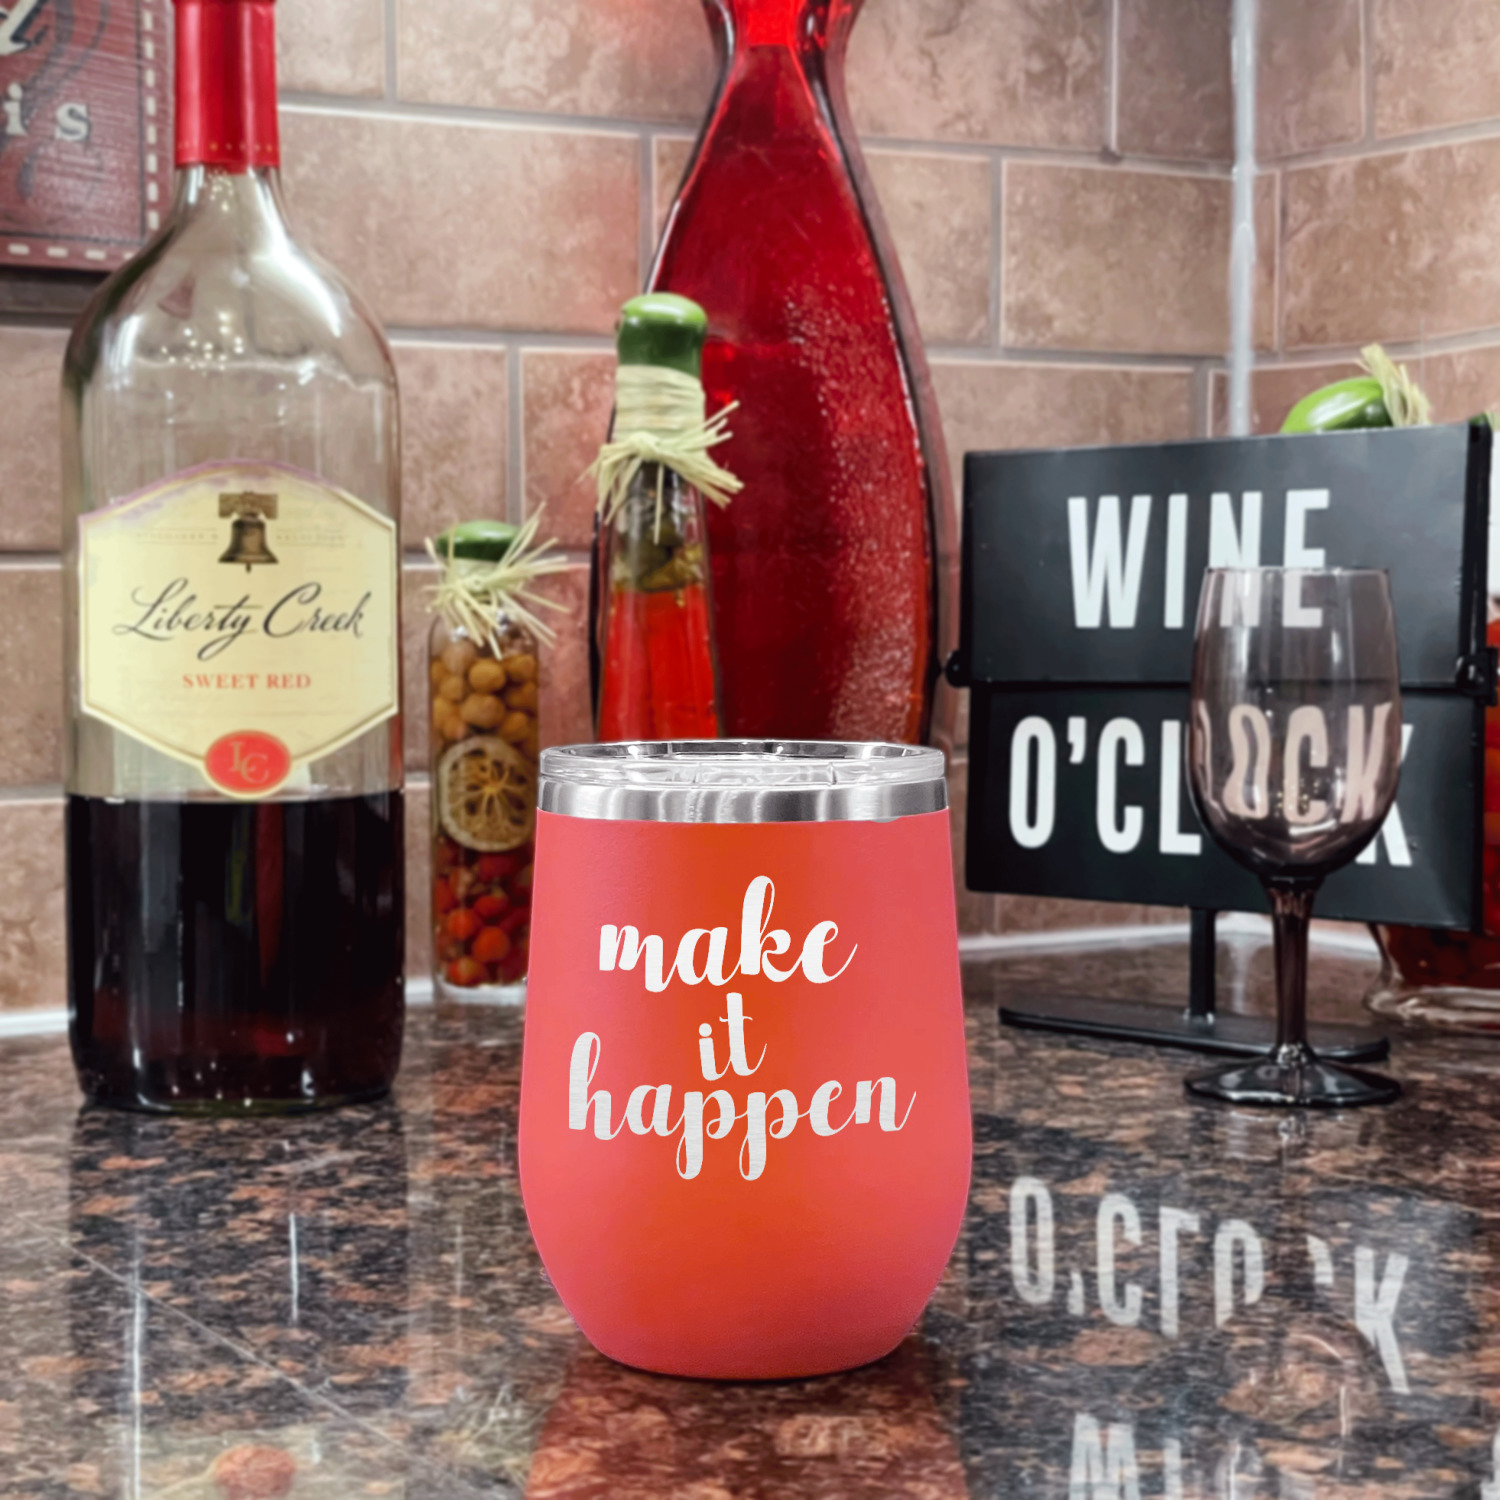 https://www.youcustomizeit.com/common/MAKE/1038234/Inspirational-Quotes-and-Sayings-Stainless-Wine-Tumblers-Coral-Double-Sided-In-Context.jpg?lm=1644251120